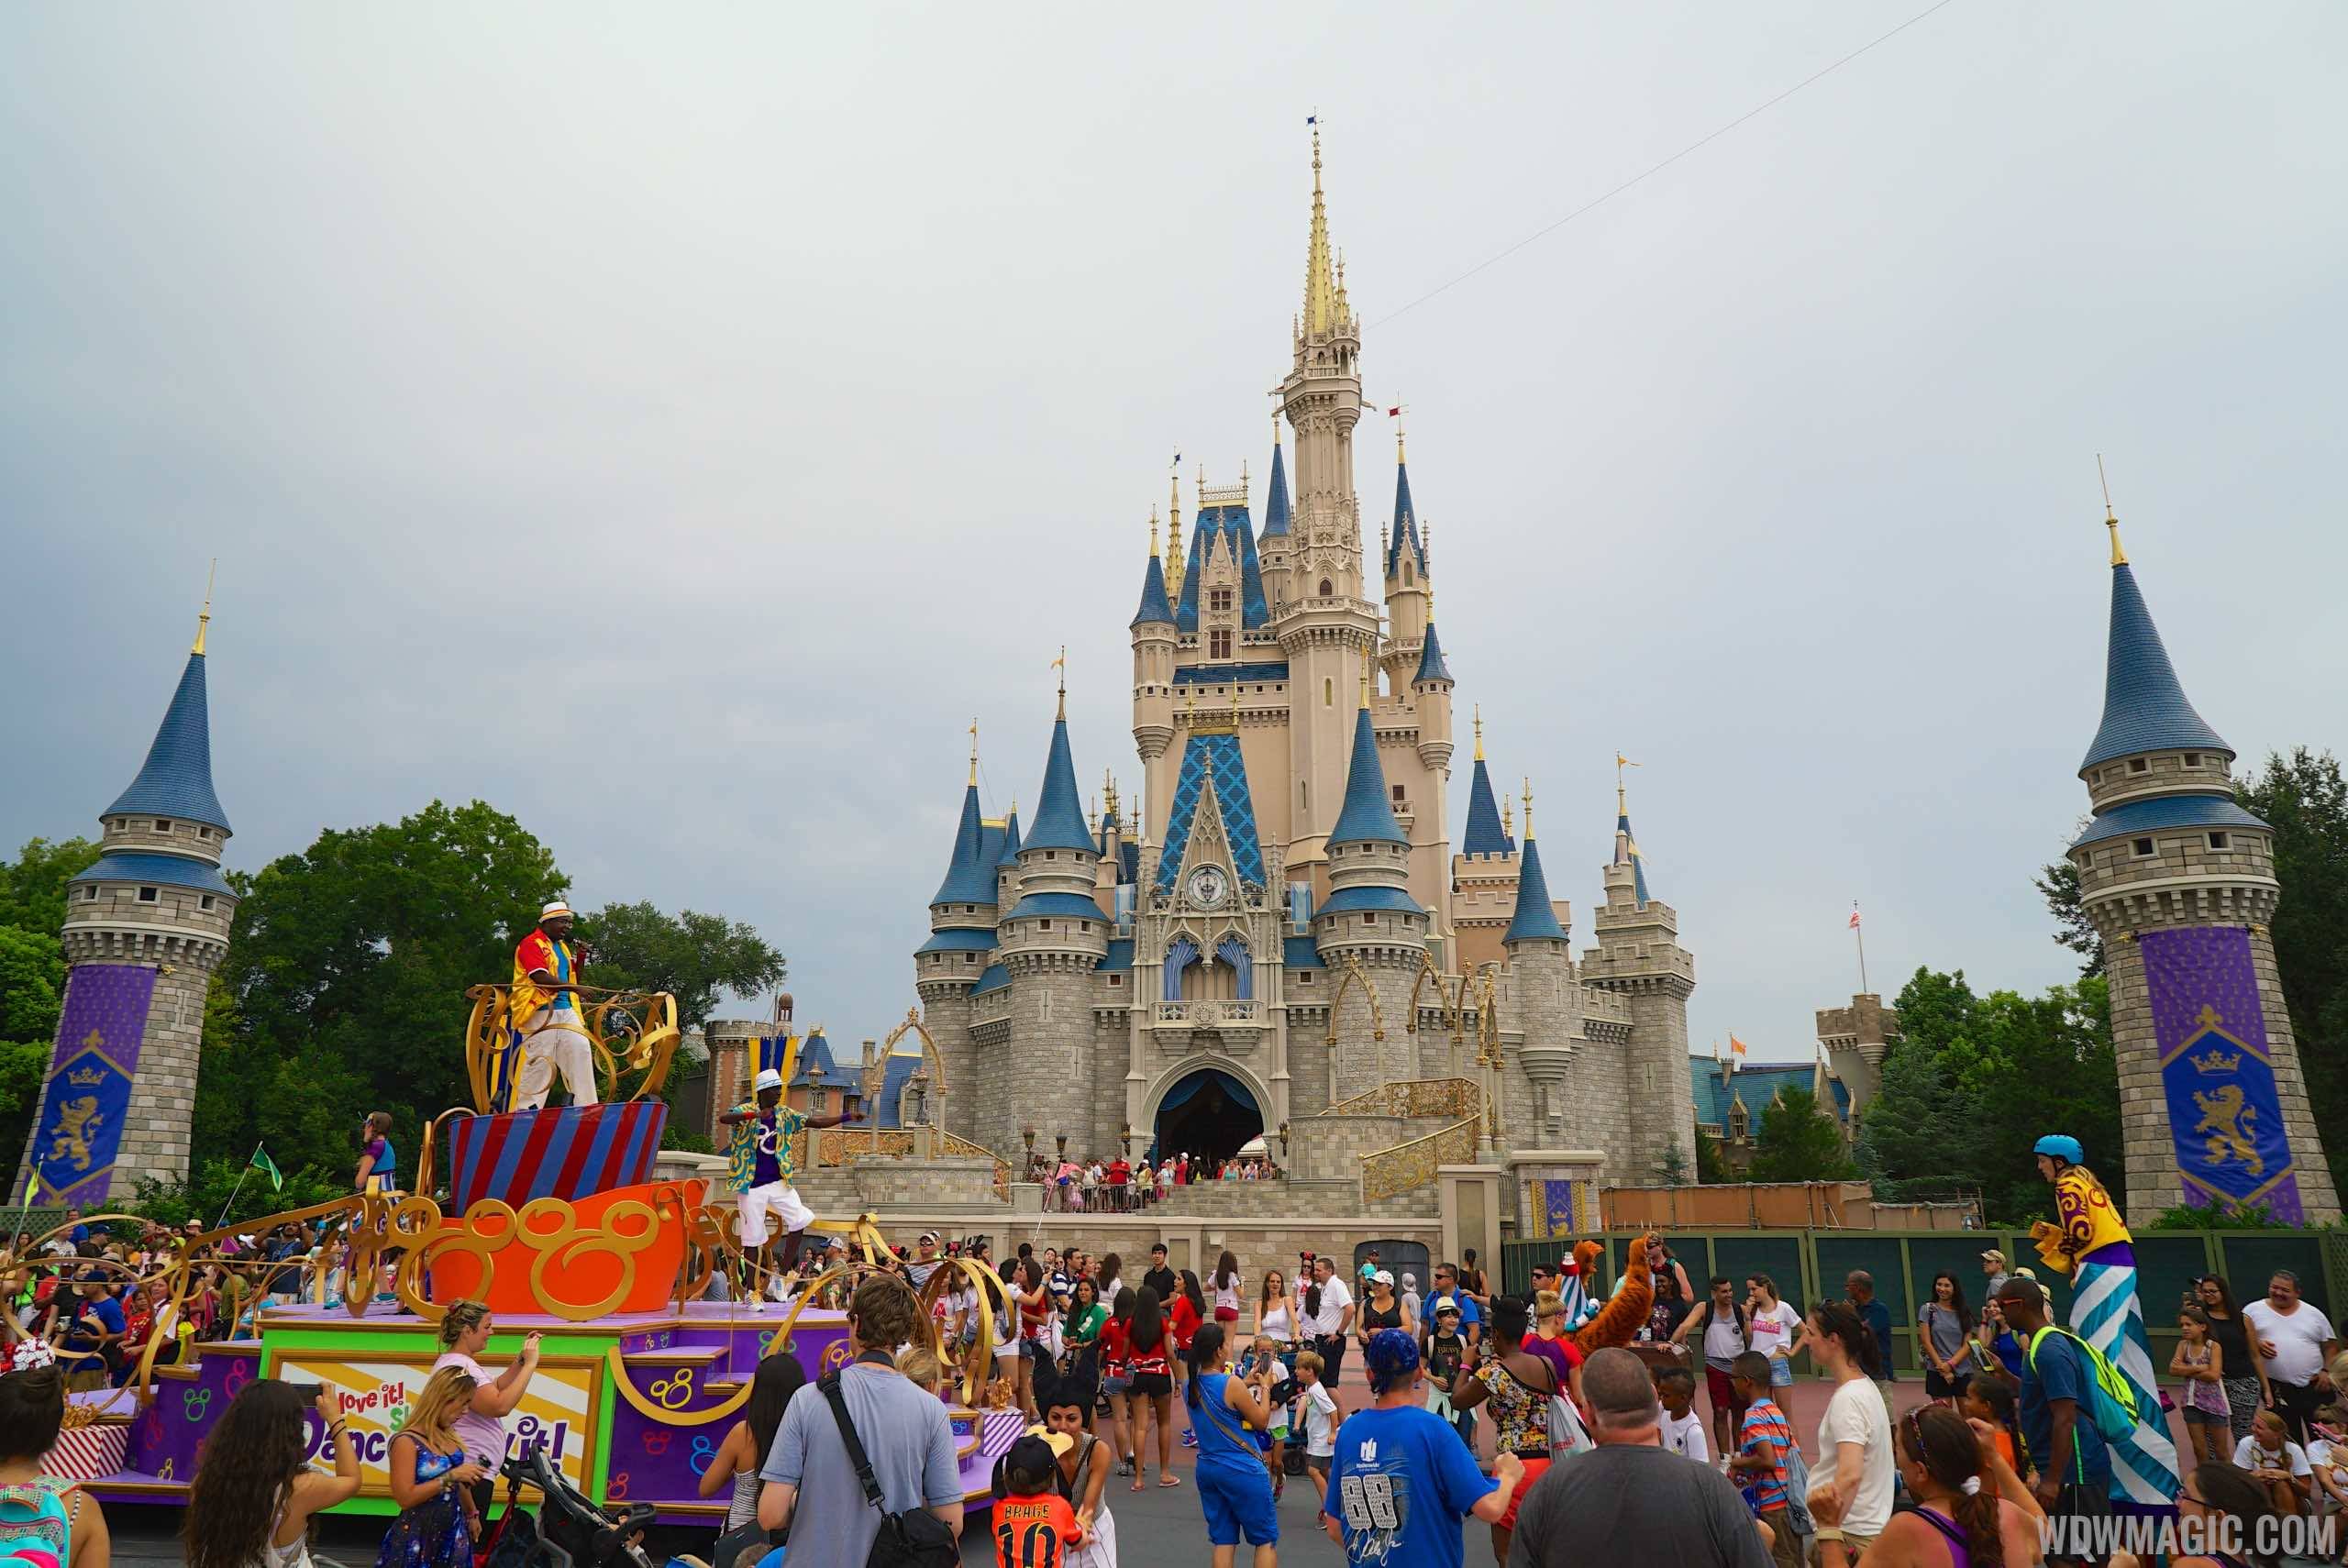 PHOTOS - New turrets unveiled at Cinderella Castle in the Magic Kingdom